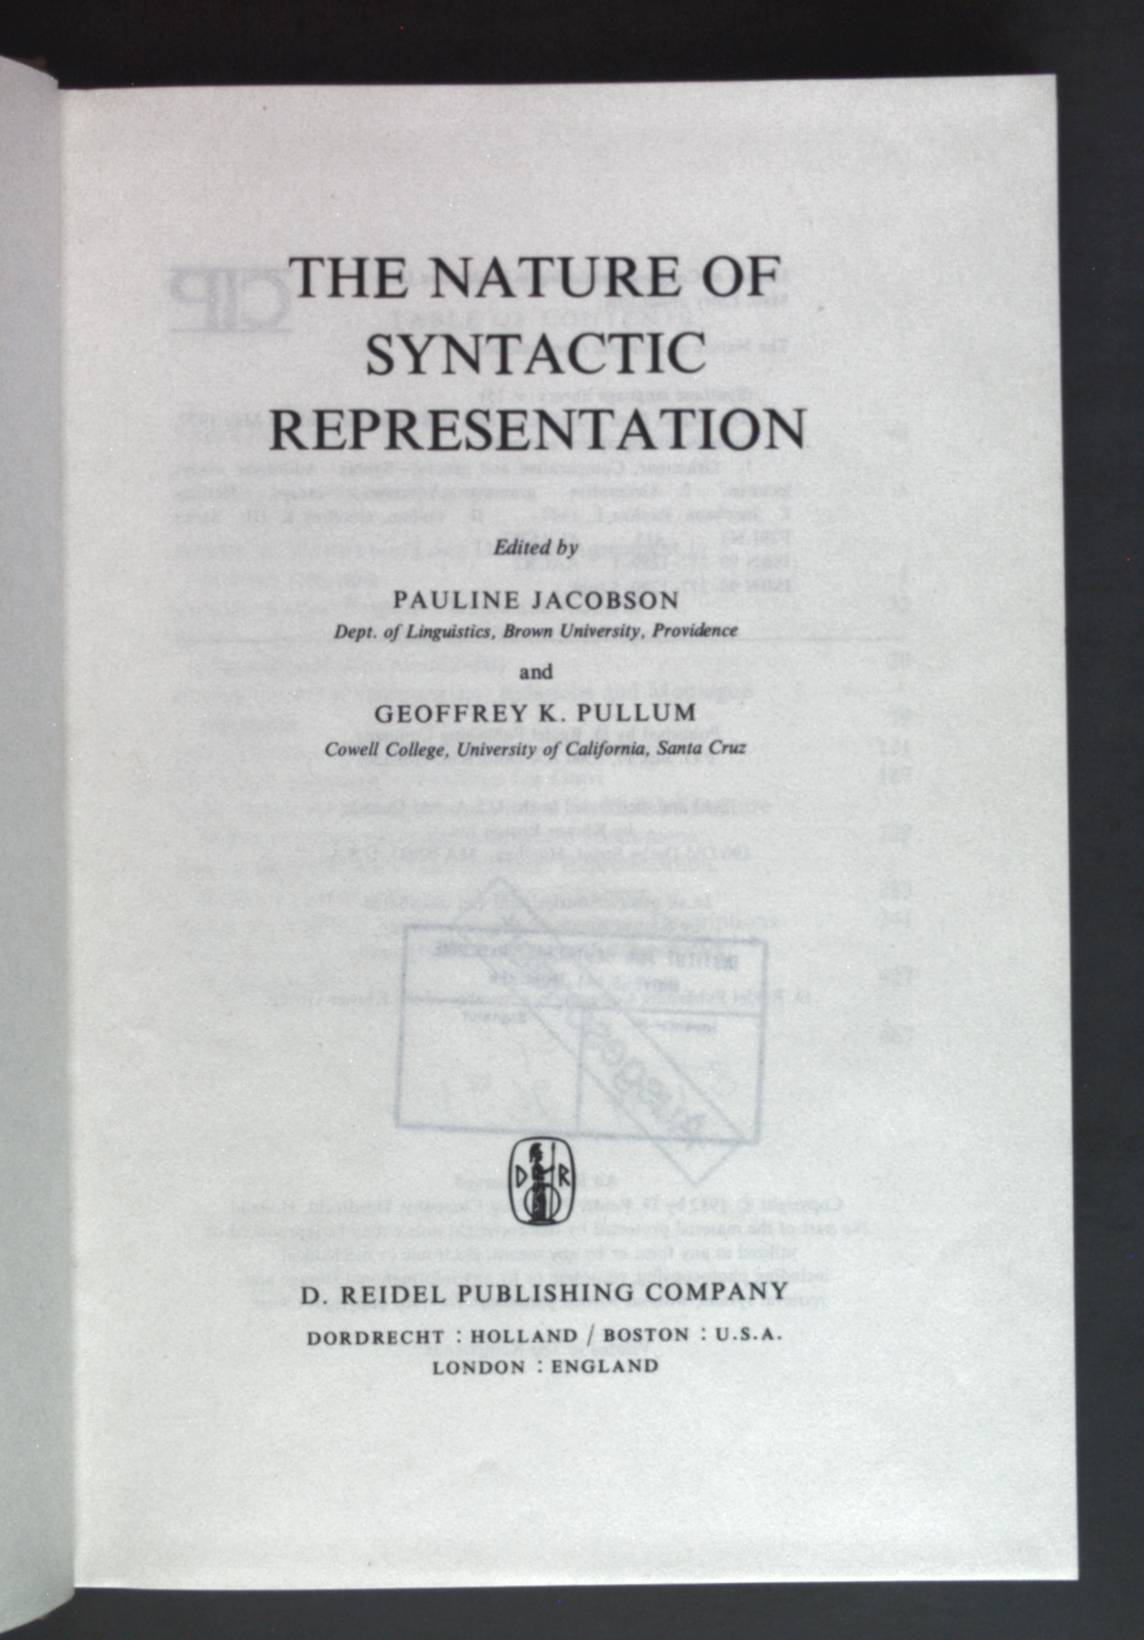 The Nature of Syntactic Representation. Studies in Linguistics and Philosophy, Band 15 - Jacobson, Pauline and G.K. Pullum